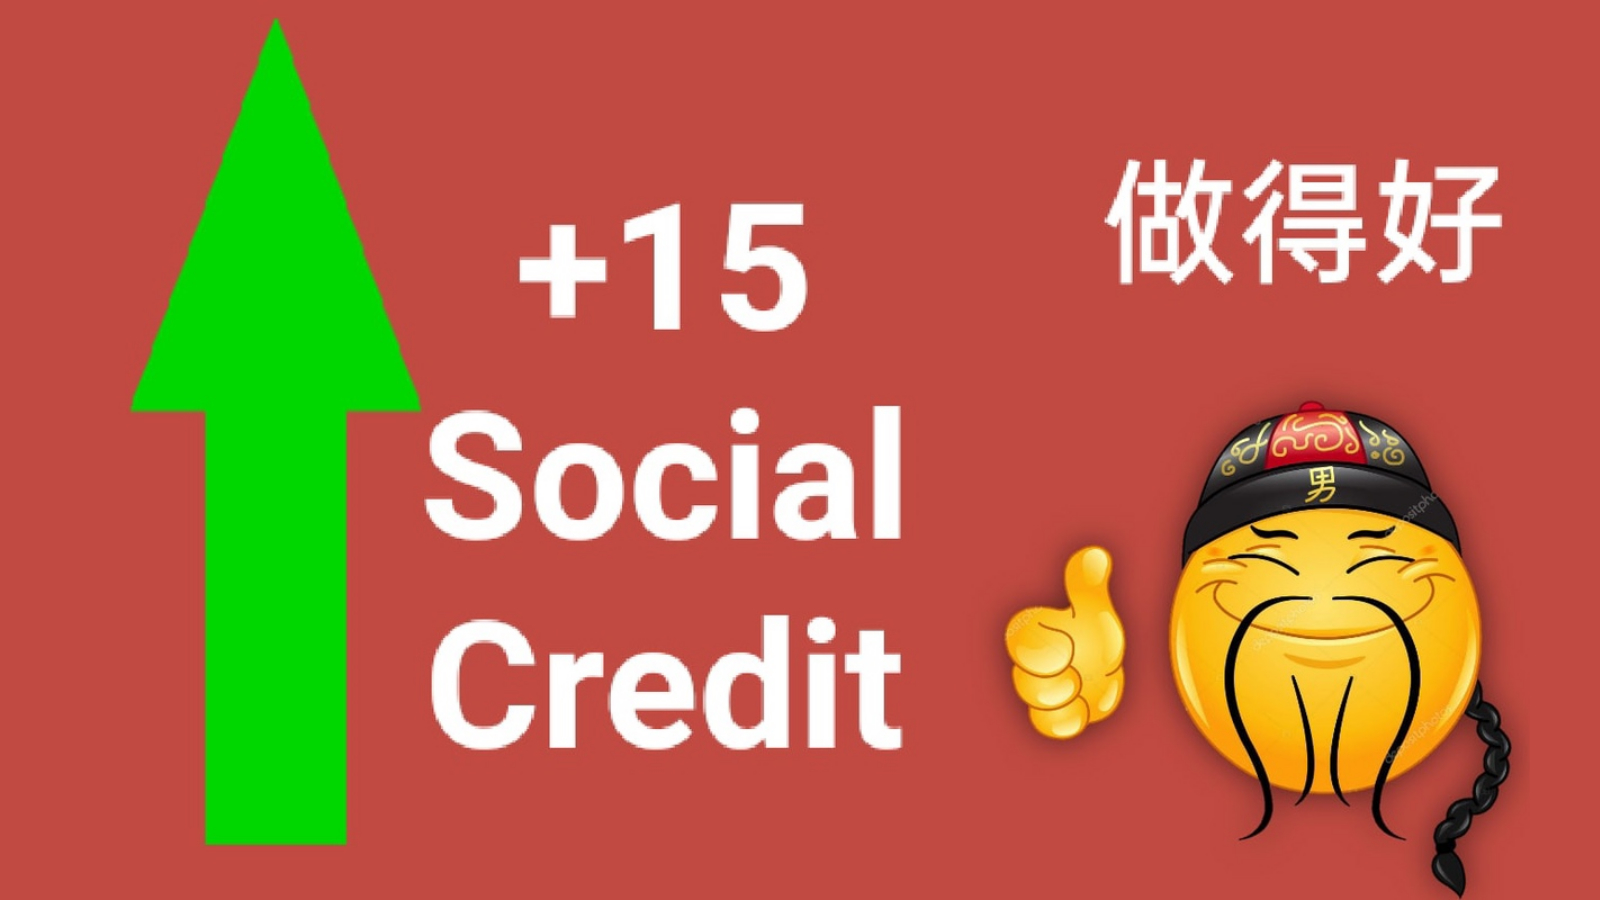 China's Social Credit System / +15 Social Credit | Know Your Meme